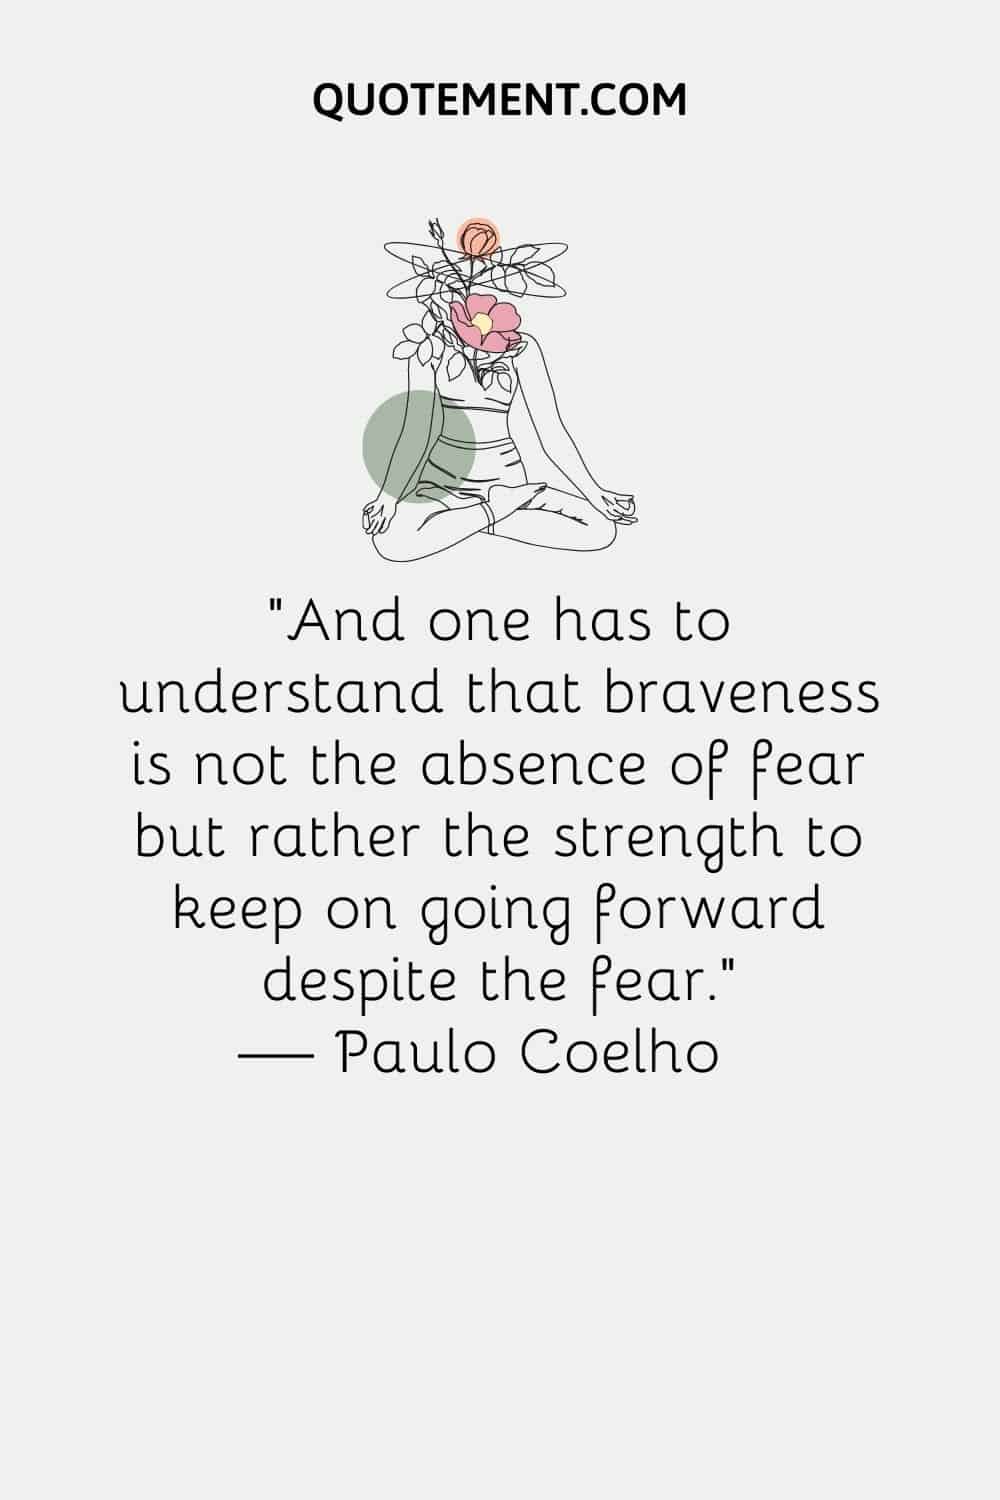 “And one has to understand that braveness is not the absence of fear but rather the strength to keep on going forward despite the fear.” ― Paulo Coelho